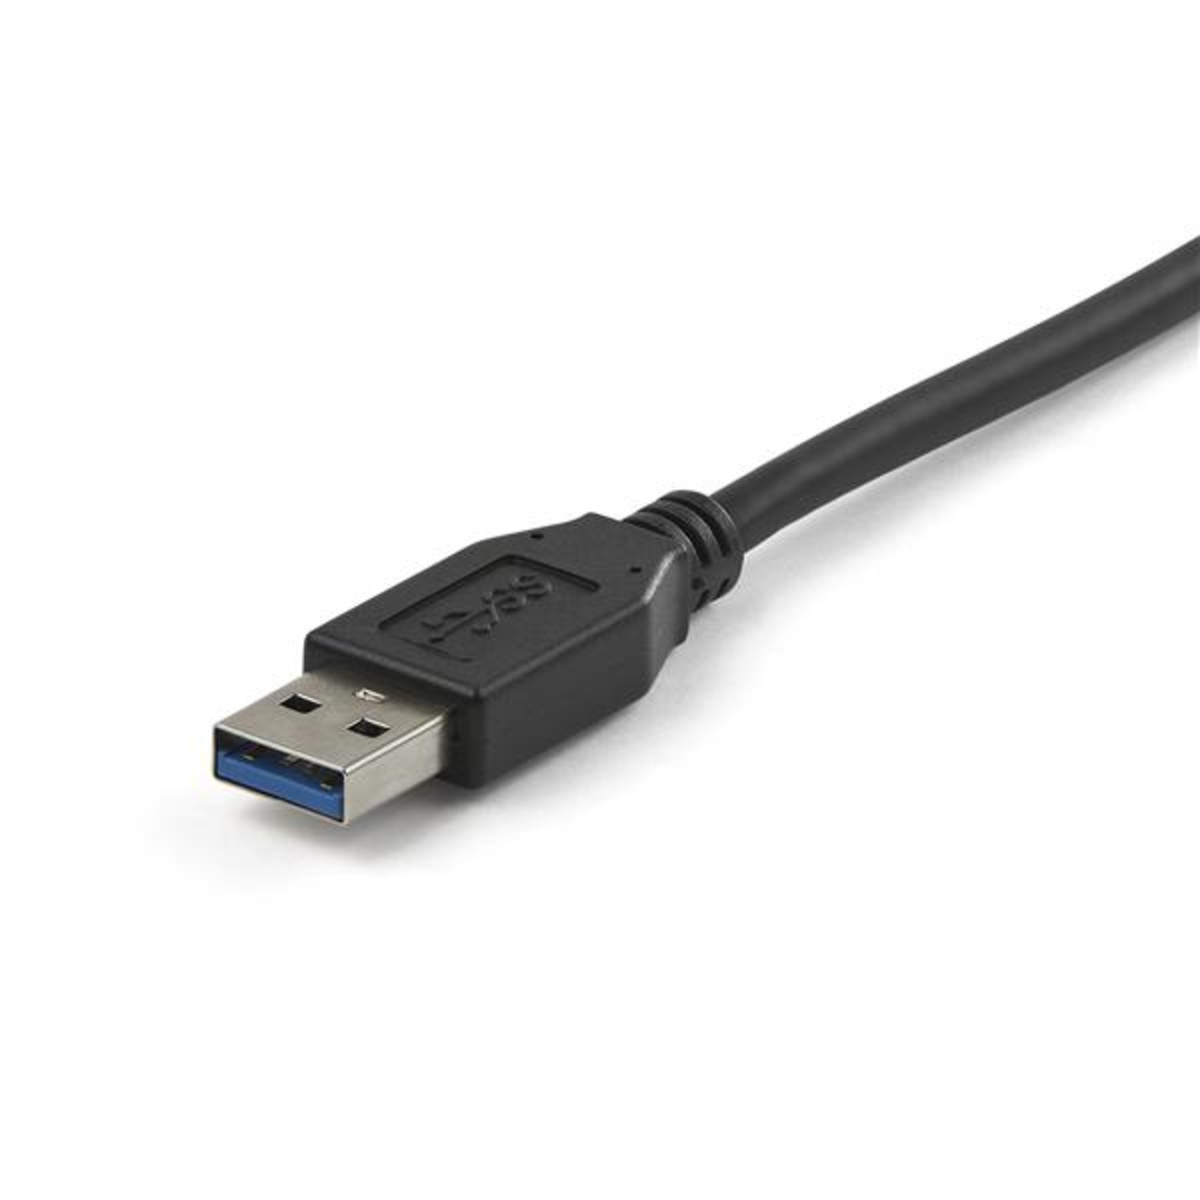 USB 3.1 USB-C to USB-A cable - 1m (3ft)